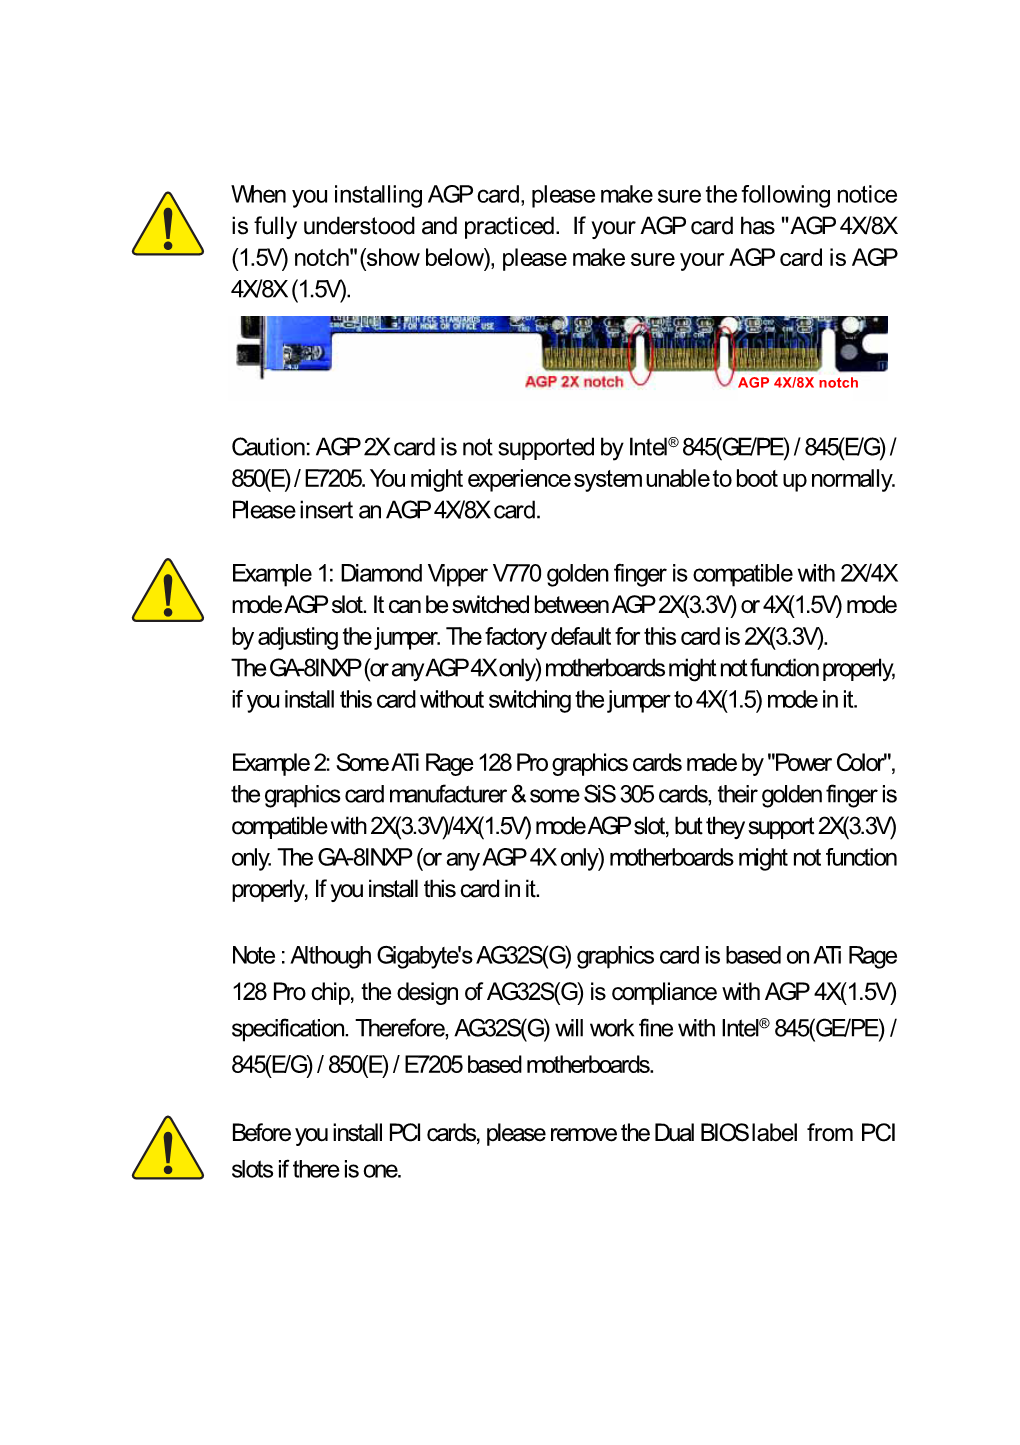 When You Installing AGP Card, Please Make Sure the Following Notice Is Fully Understood and Practiced